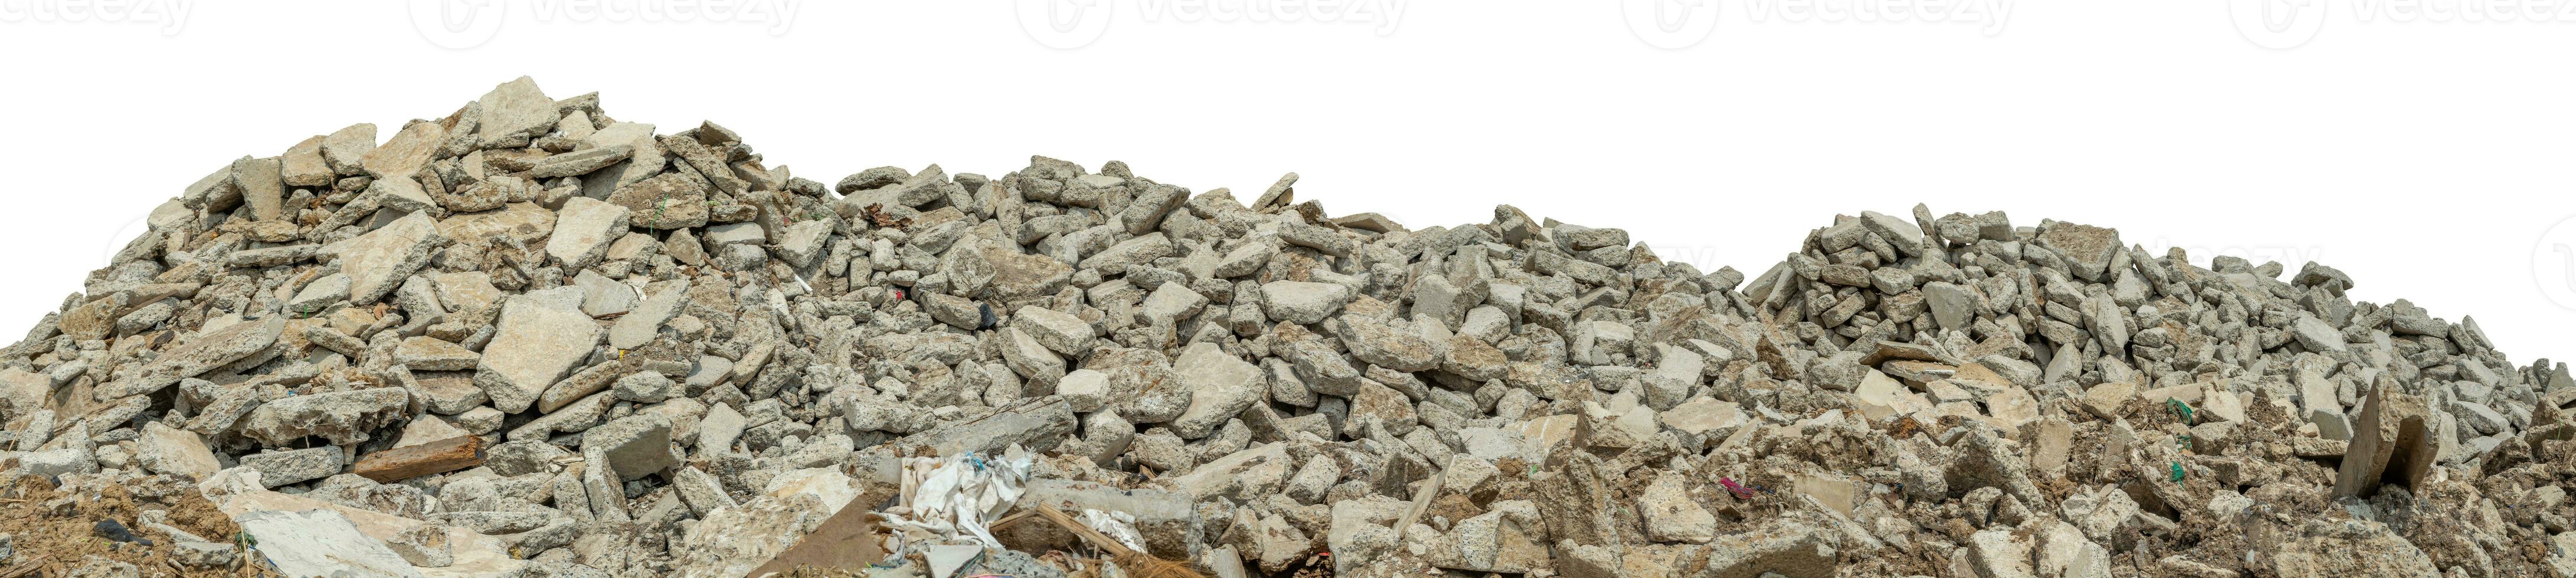 Ruined rubble isolated on white background have clipping path photo